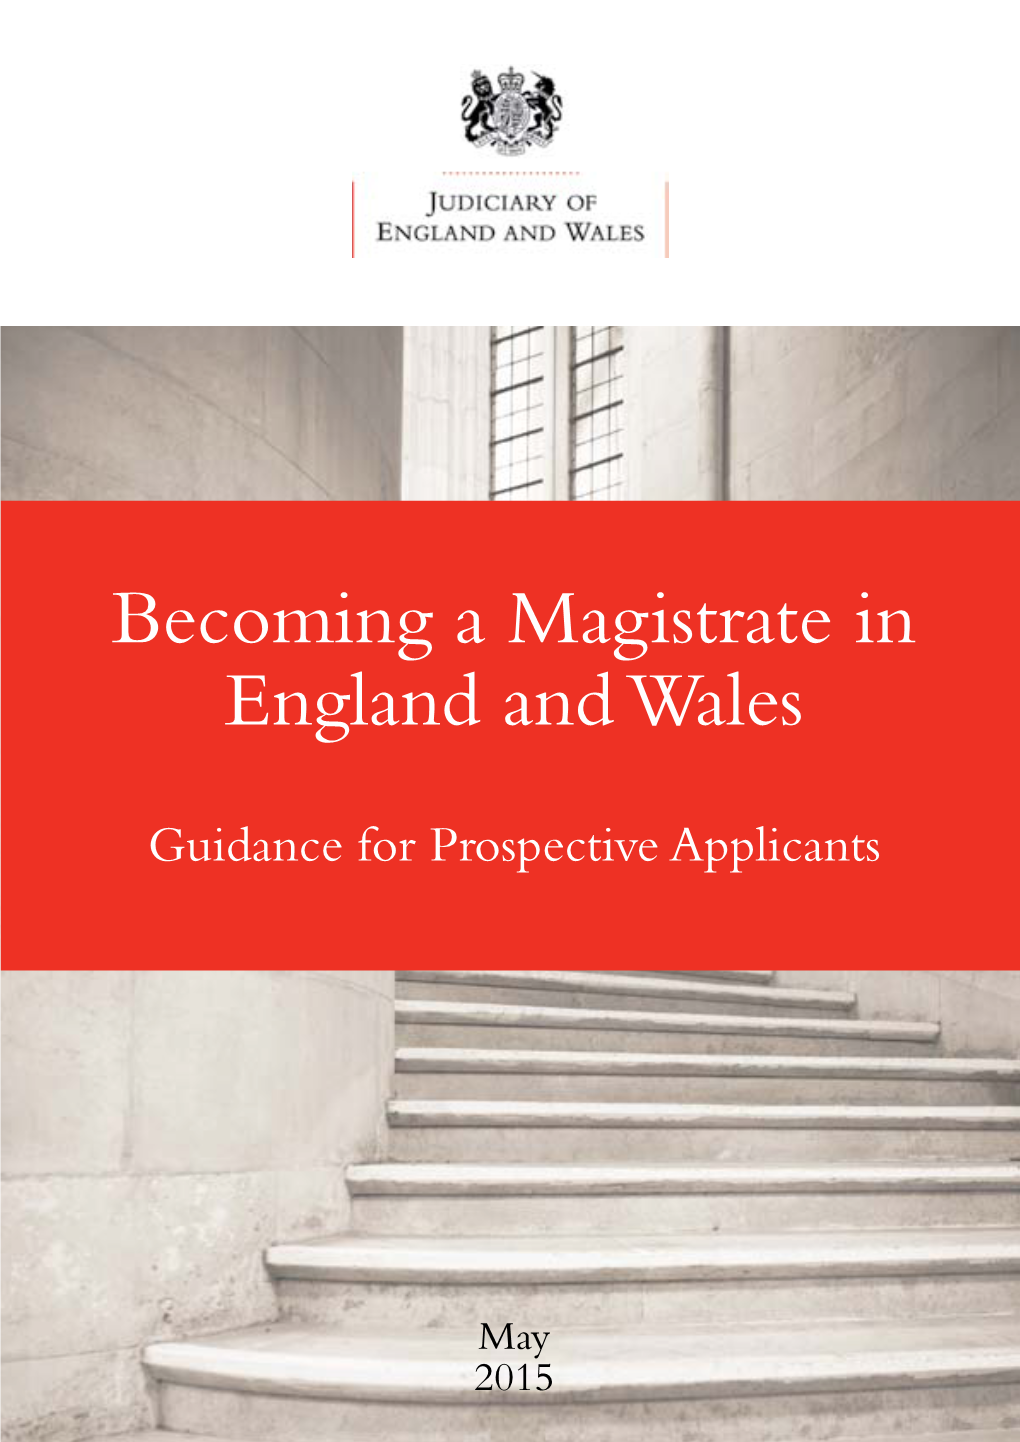 Becoming a Magistrate in England and Wales